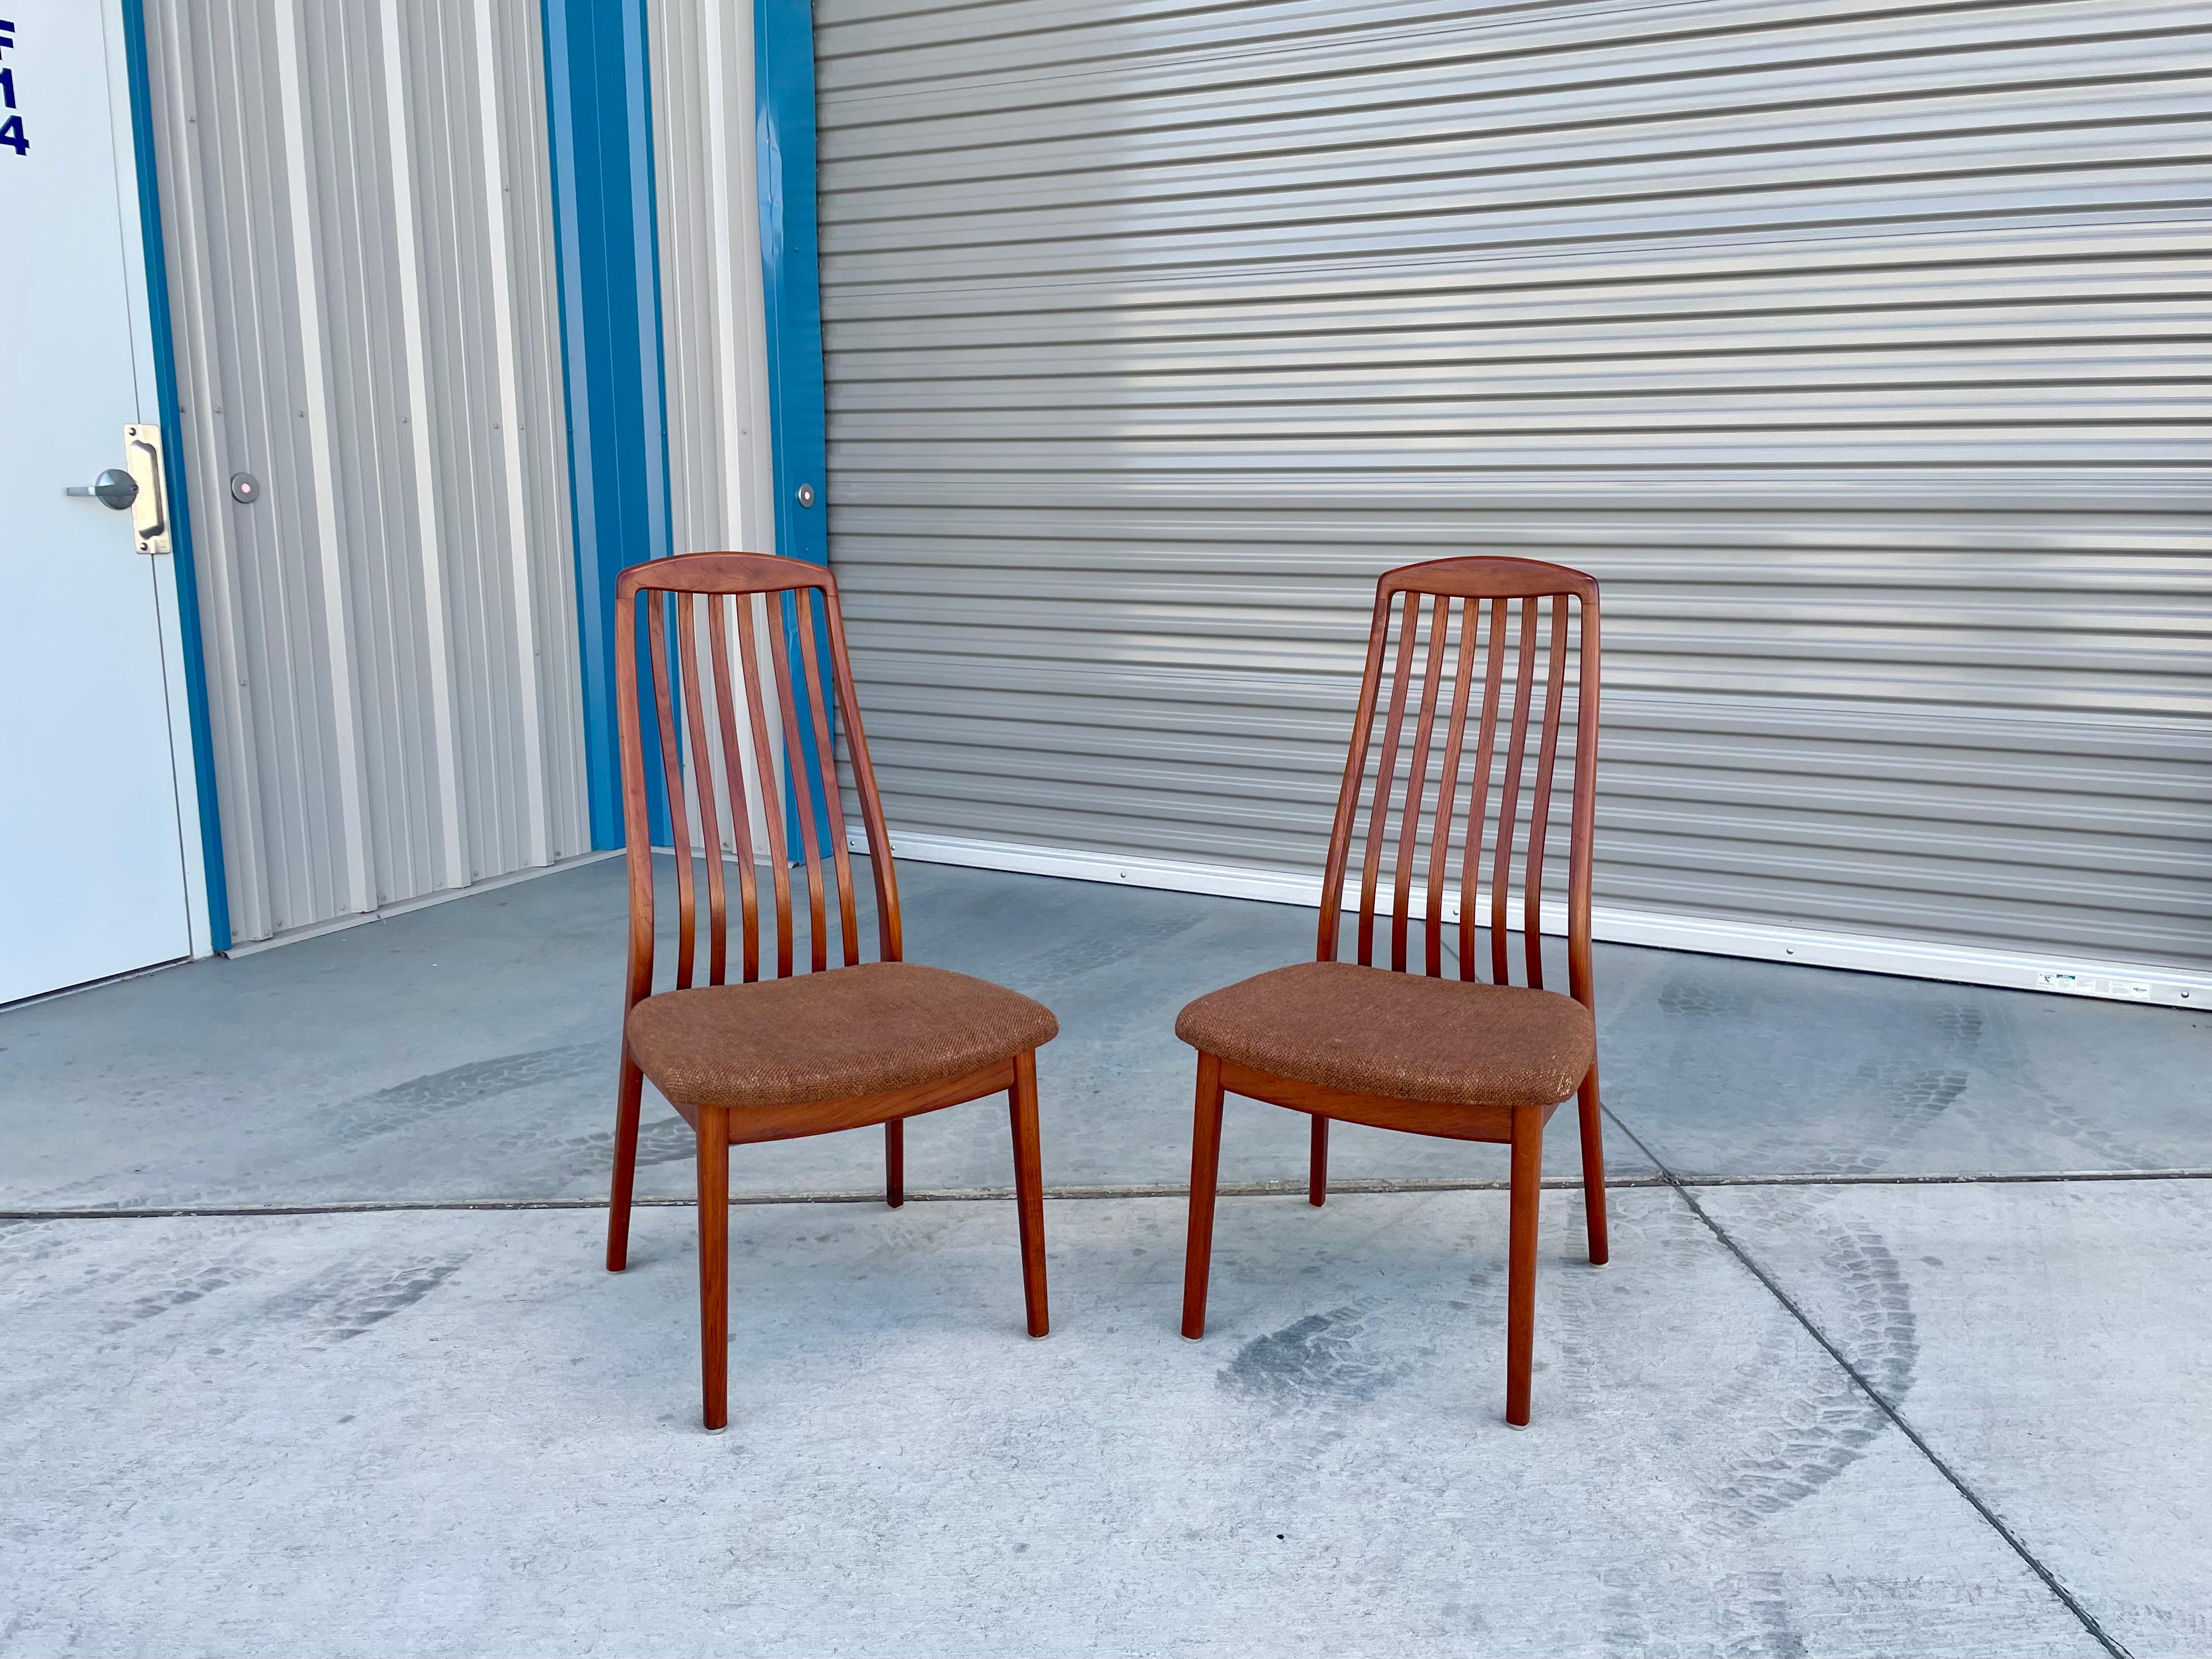 1970s Danish Modern Teak Dining Chairs by Preben-Schou - Set of 4 In Good Condition For Sale In North Hollywood, CA